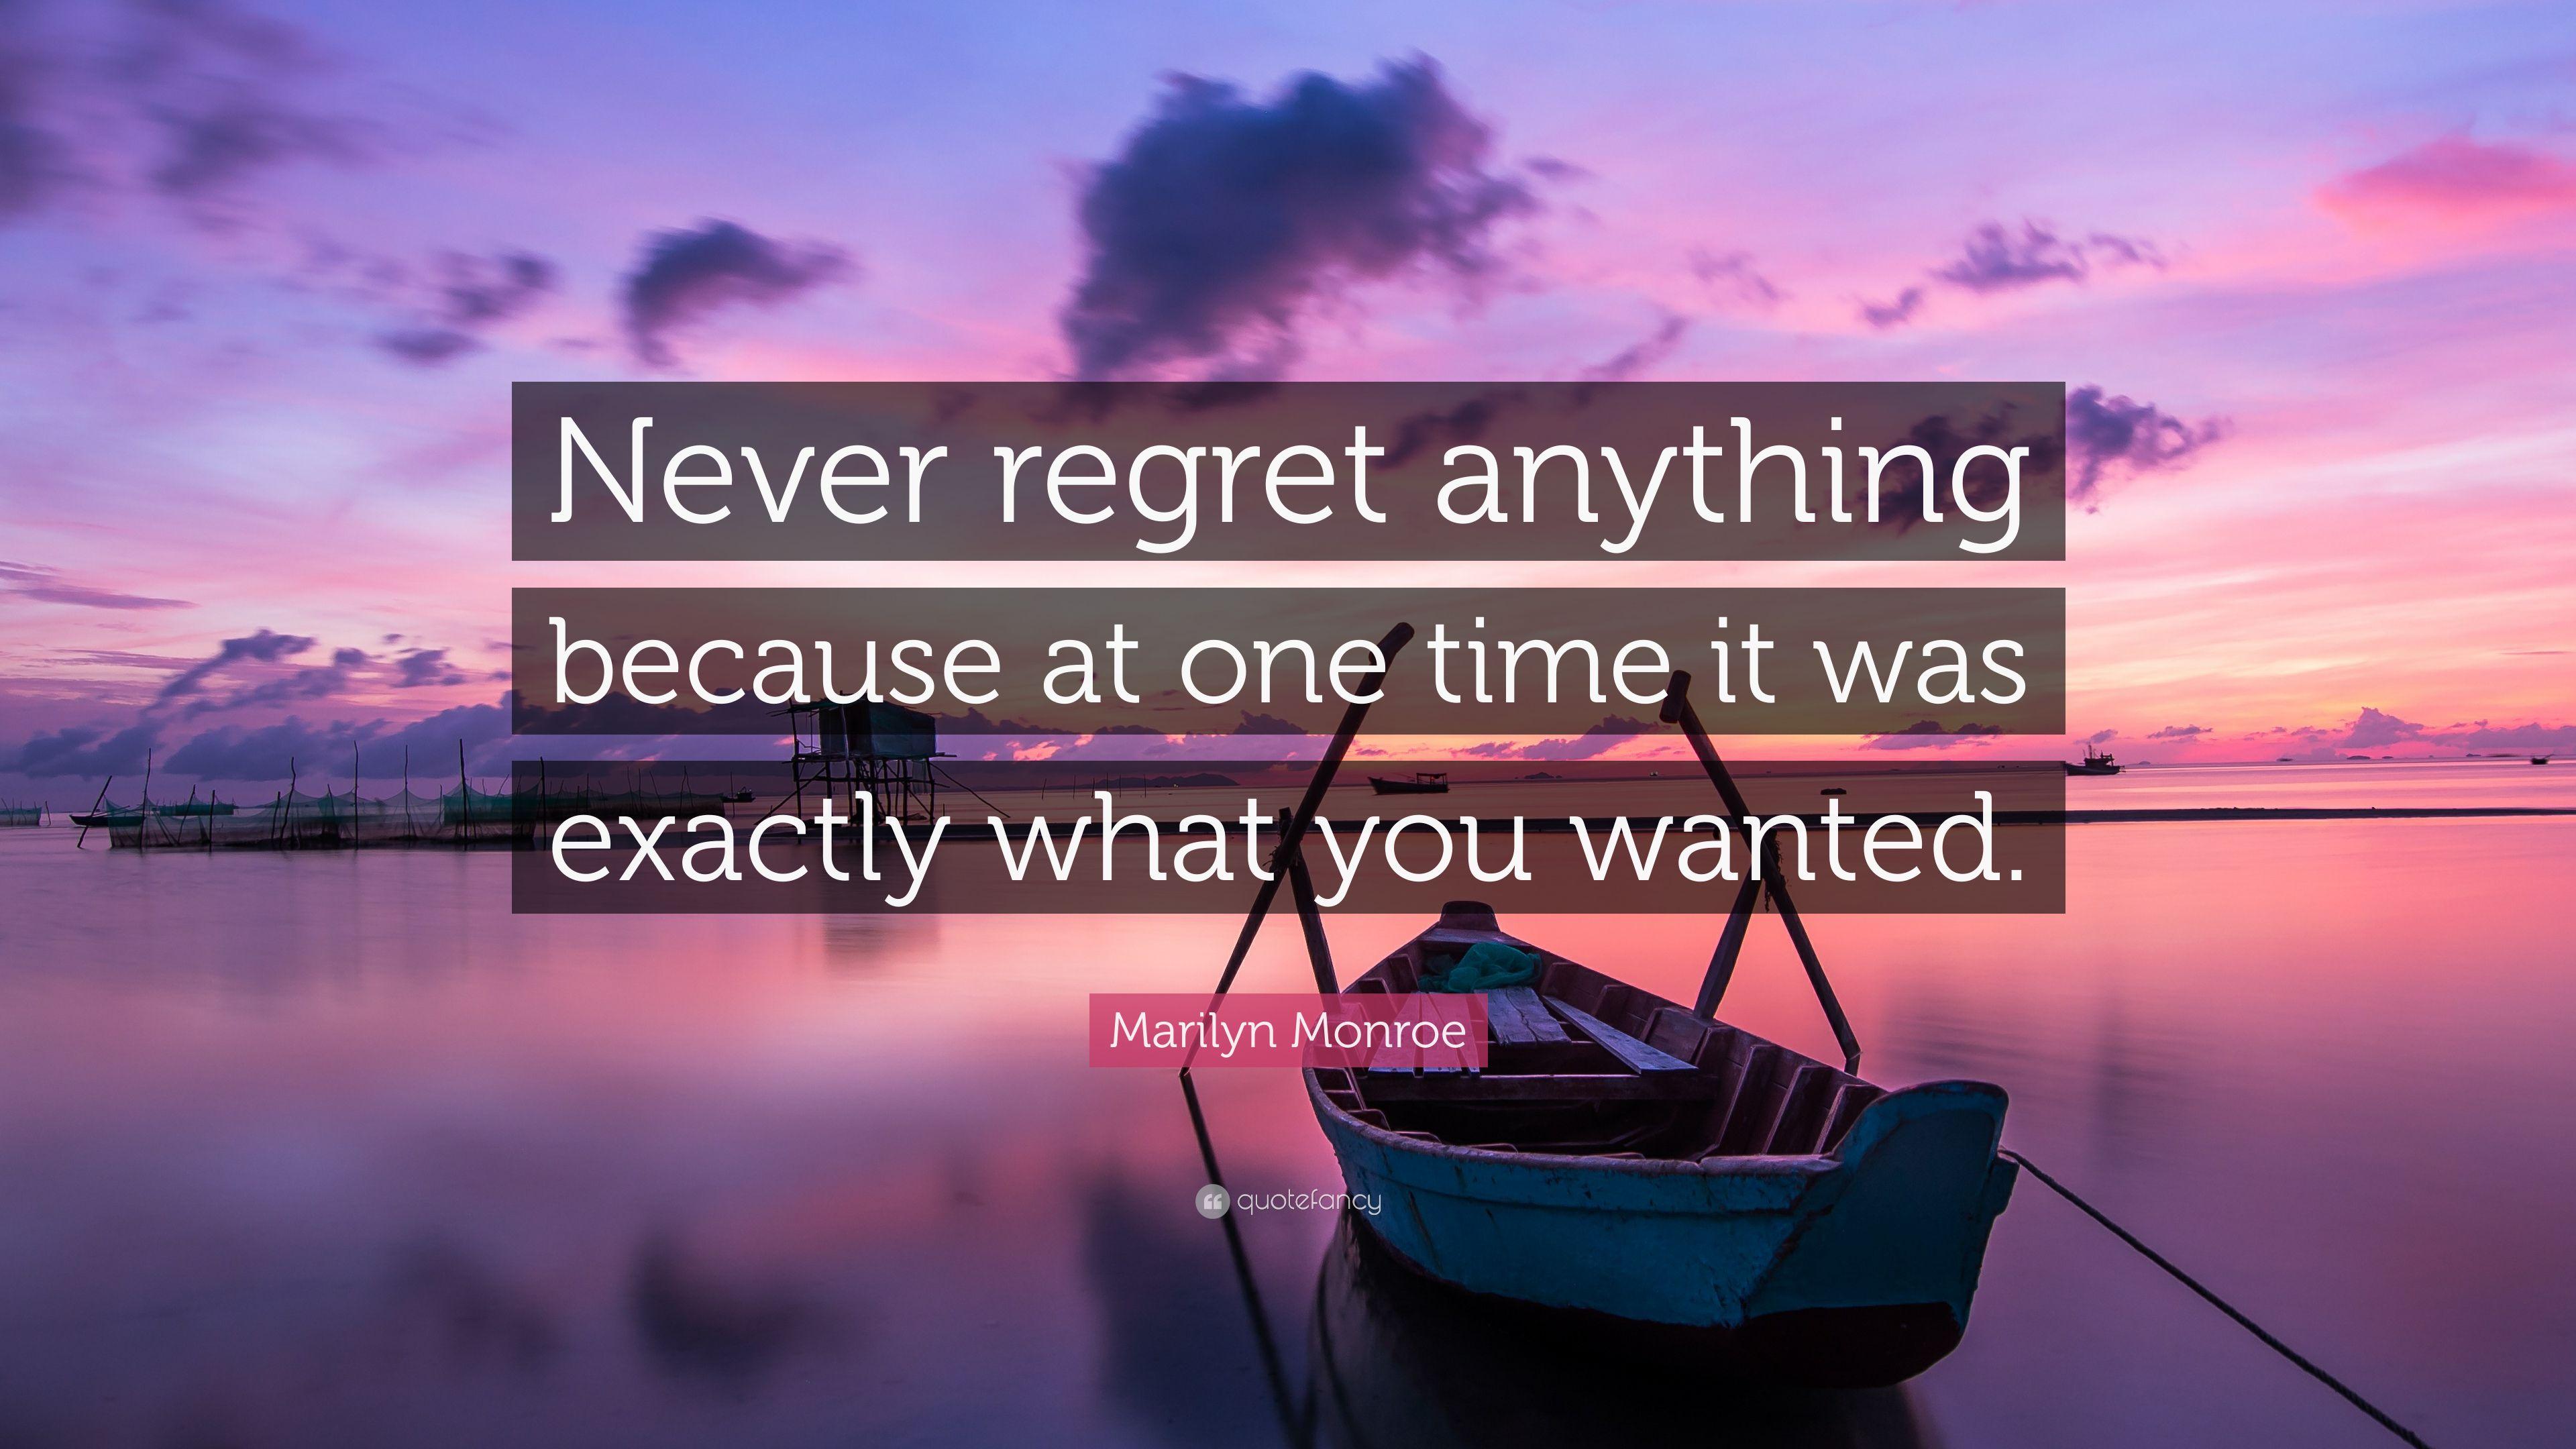 Marilyn Monroe Quote: “Never regret anything because at one time it